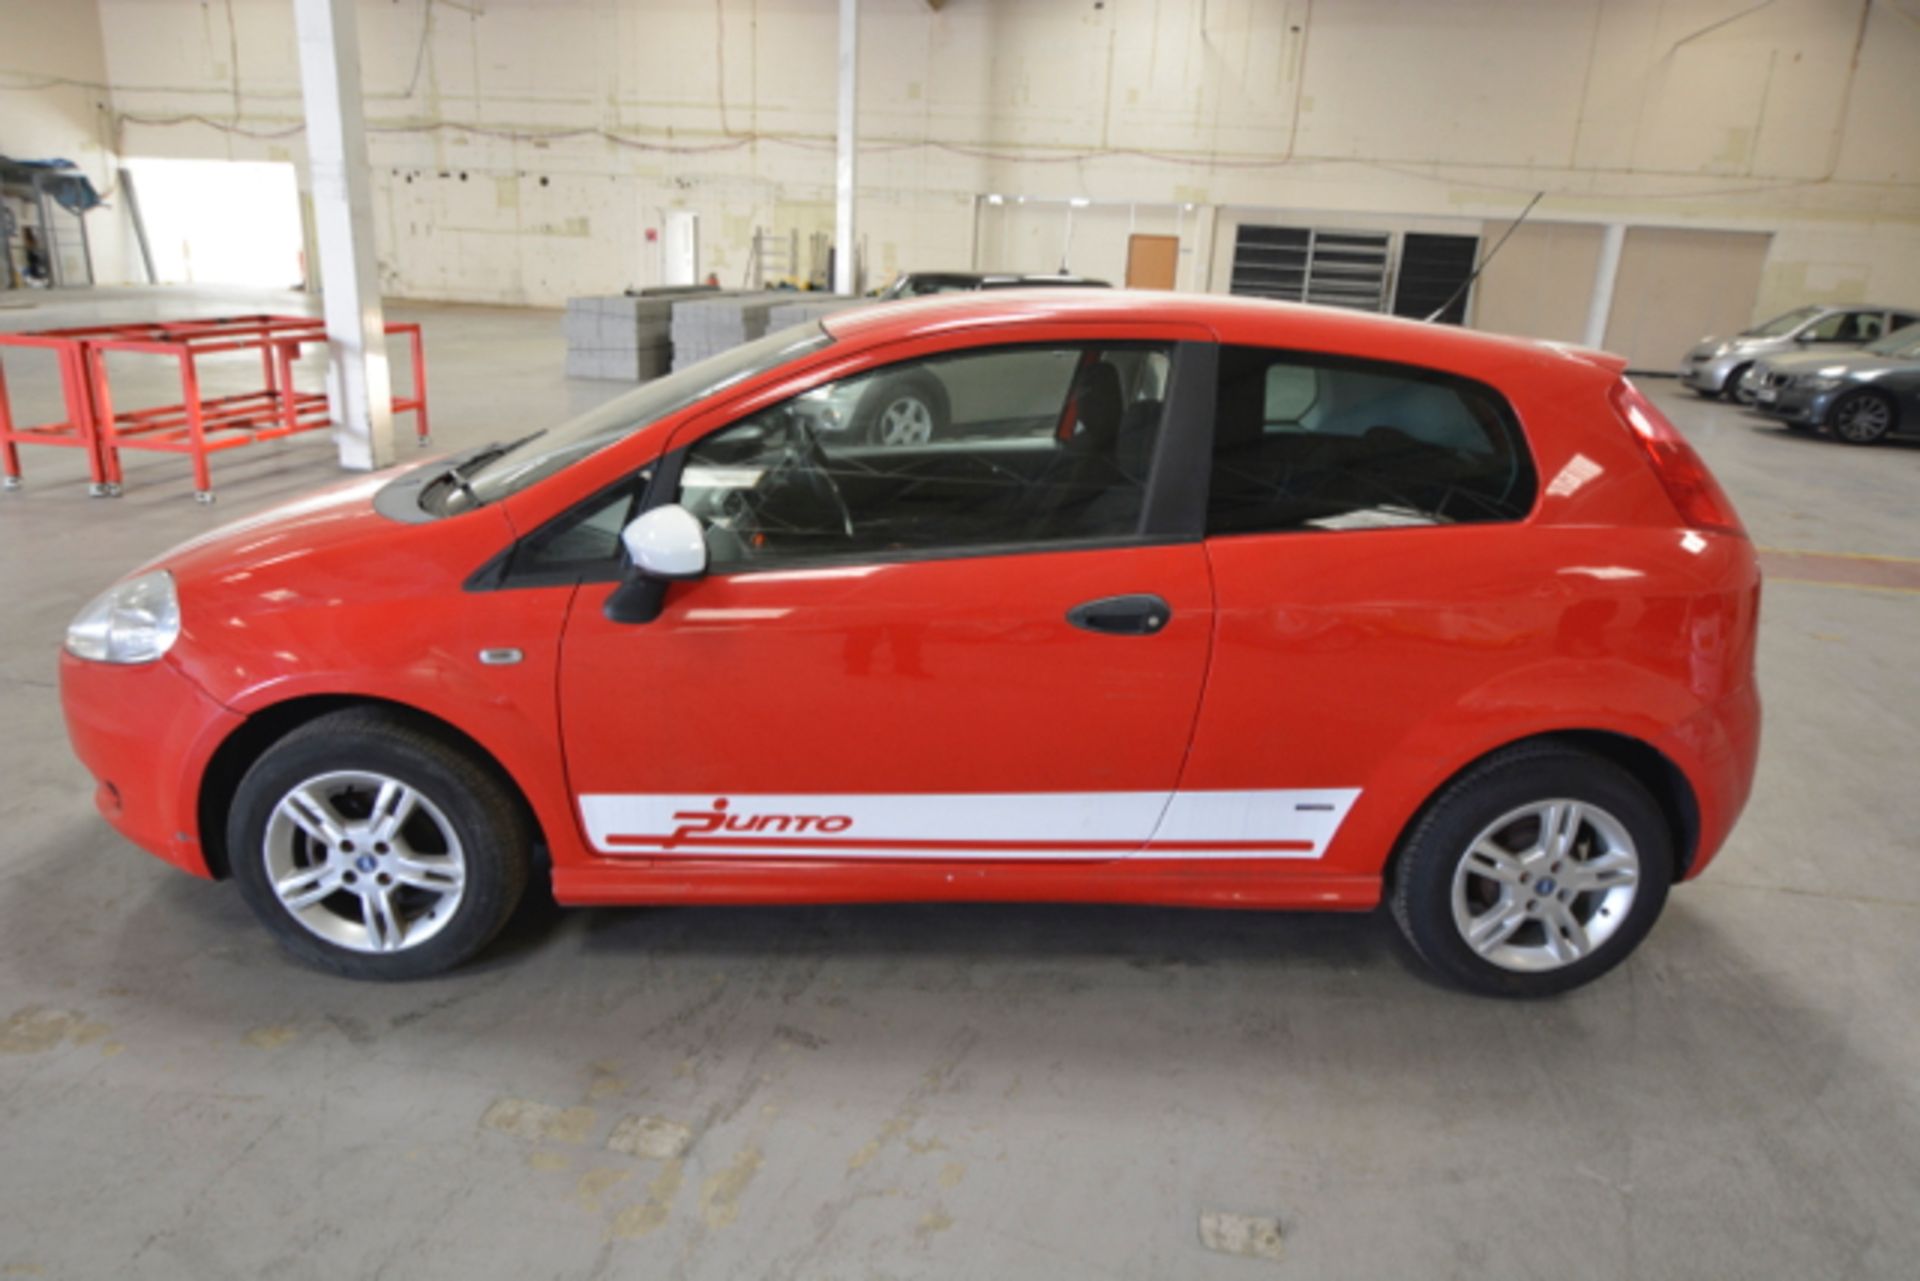 2008 Fiat Punto Active - Image 2 of 25